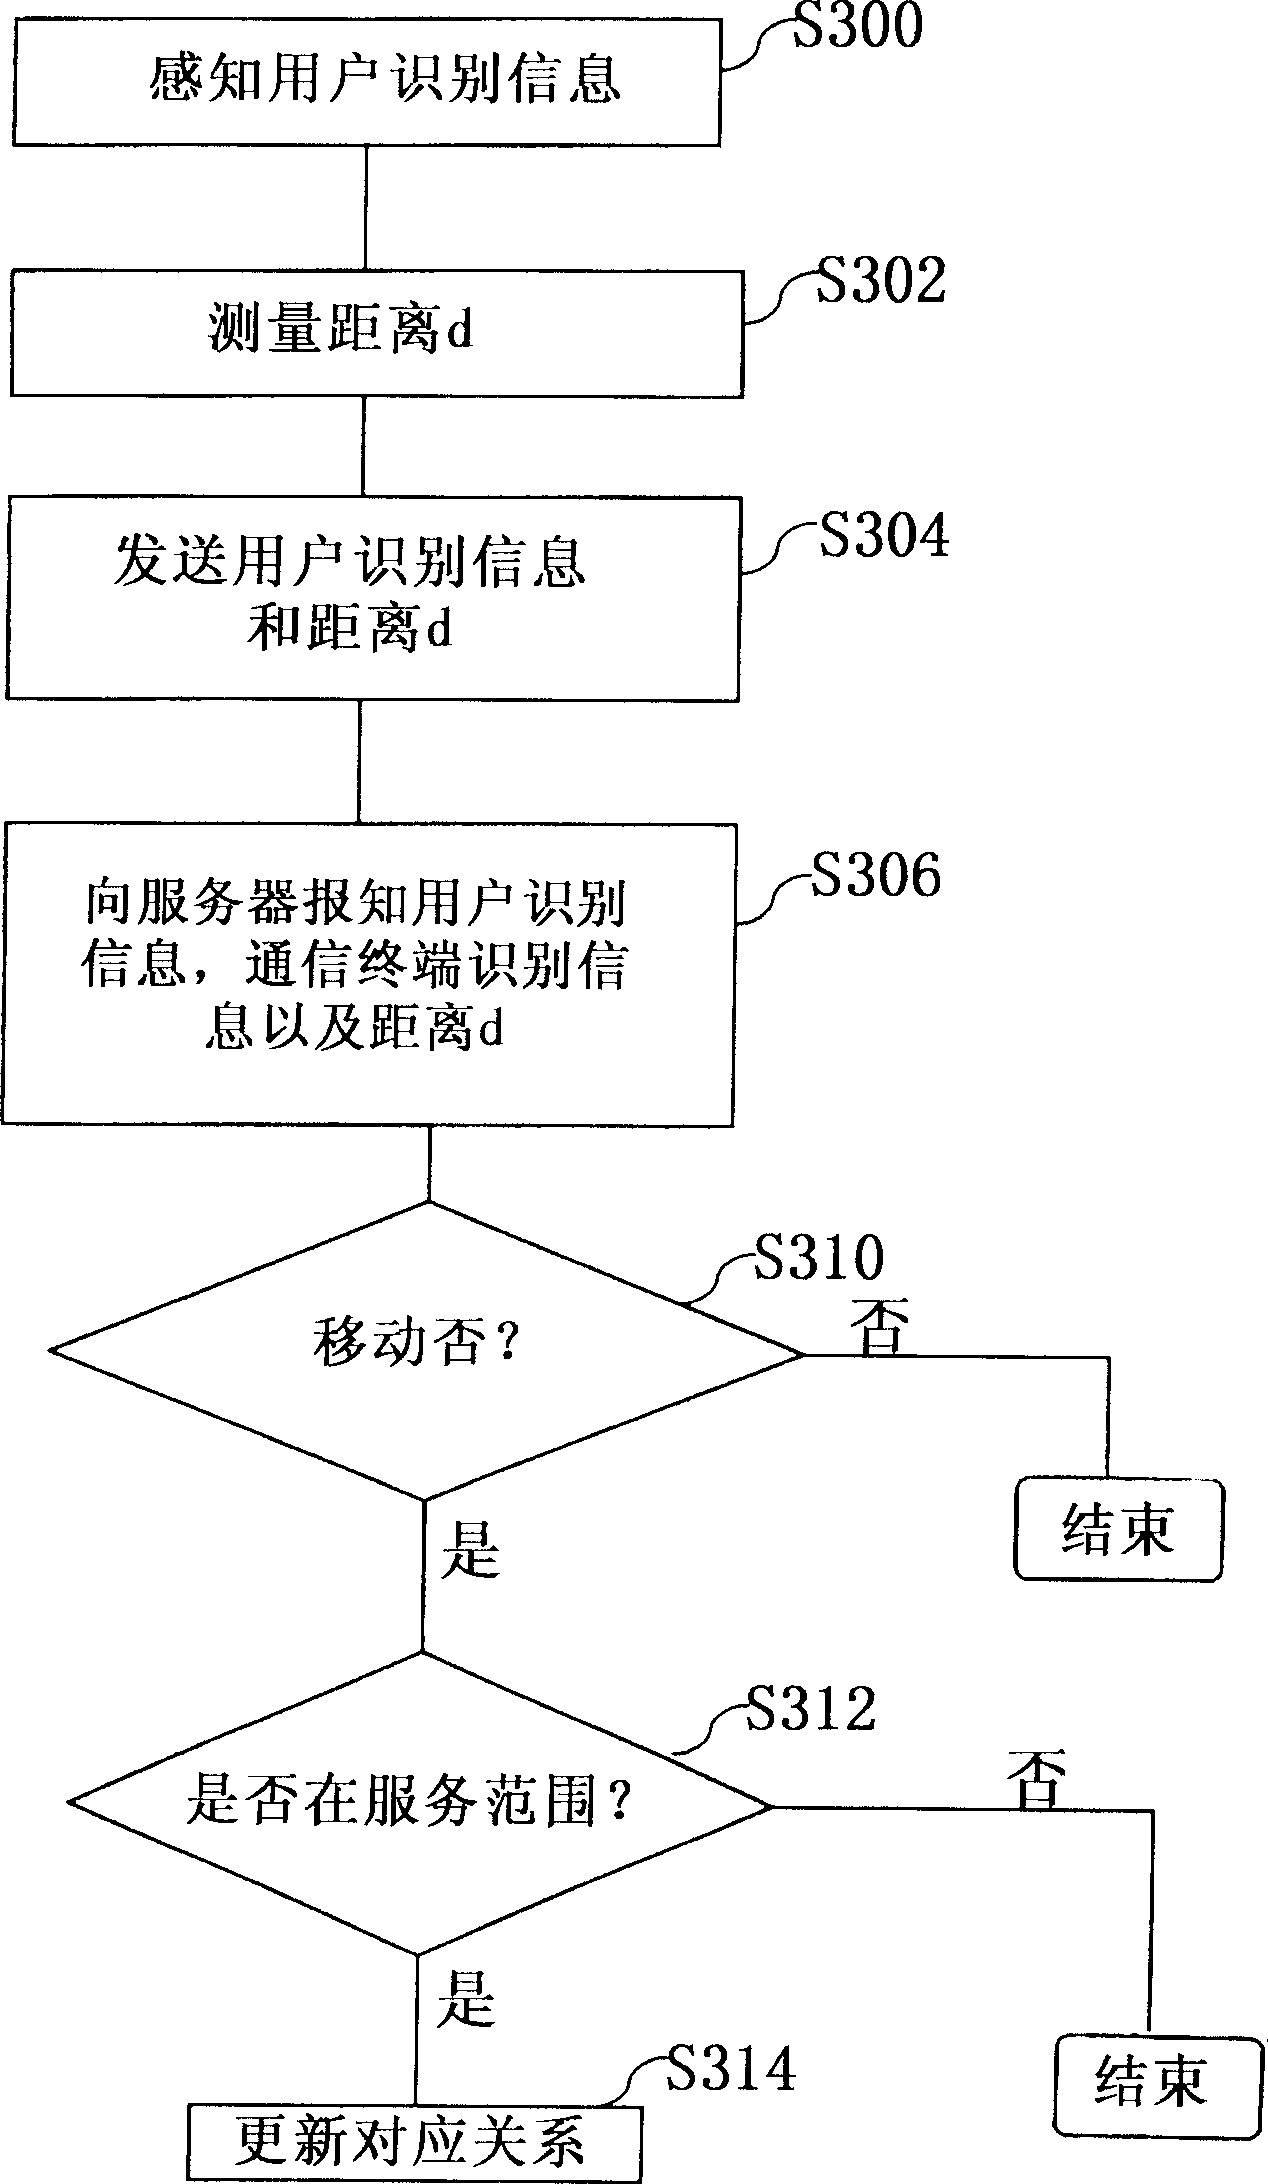 Communication terinal, call switching server, communication service providing system and method